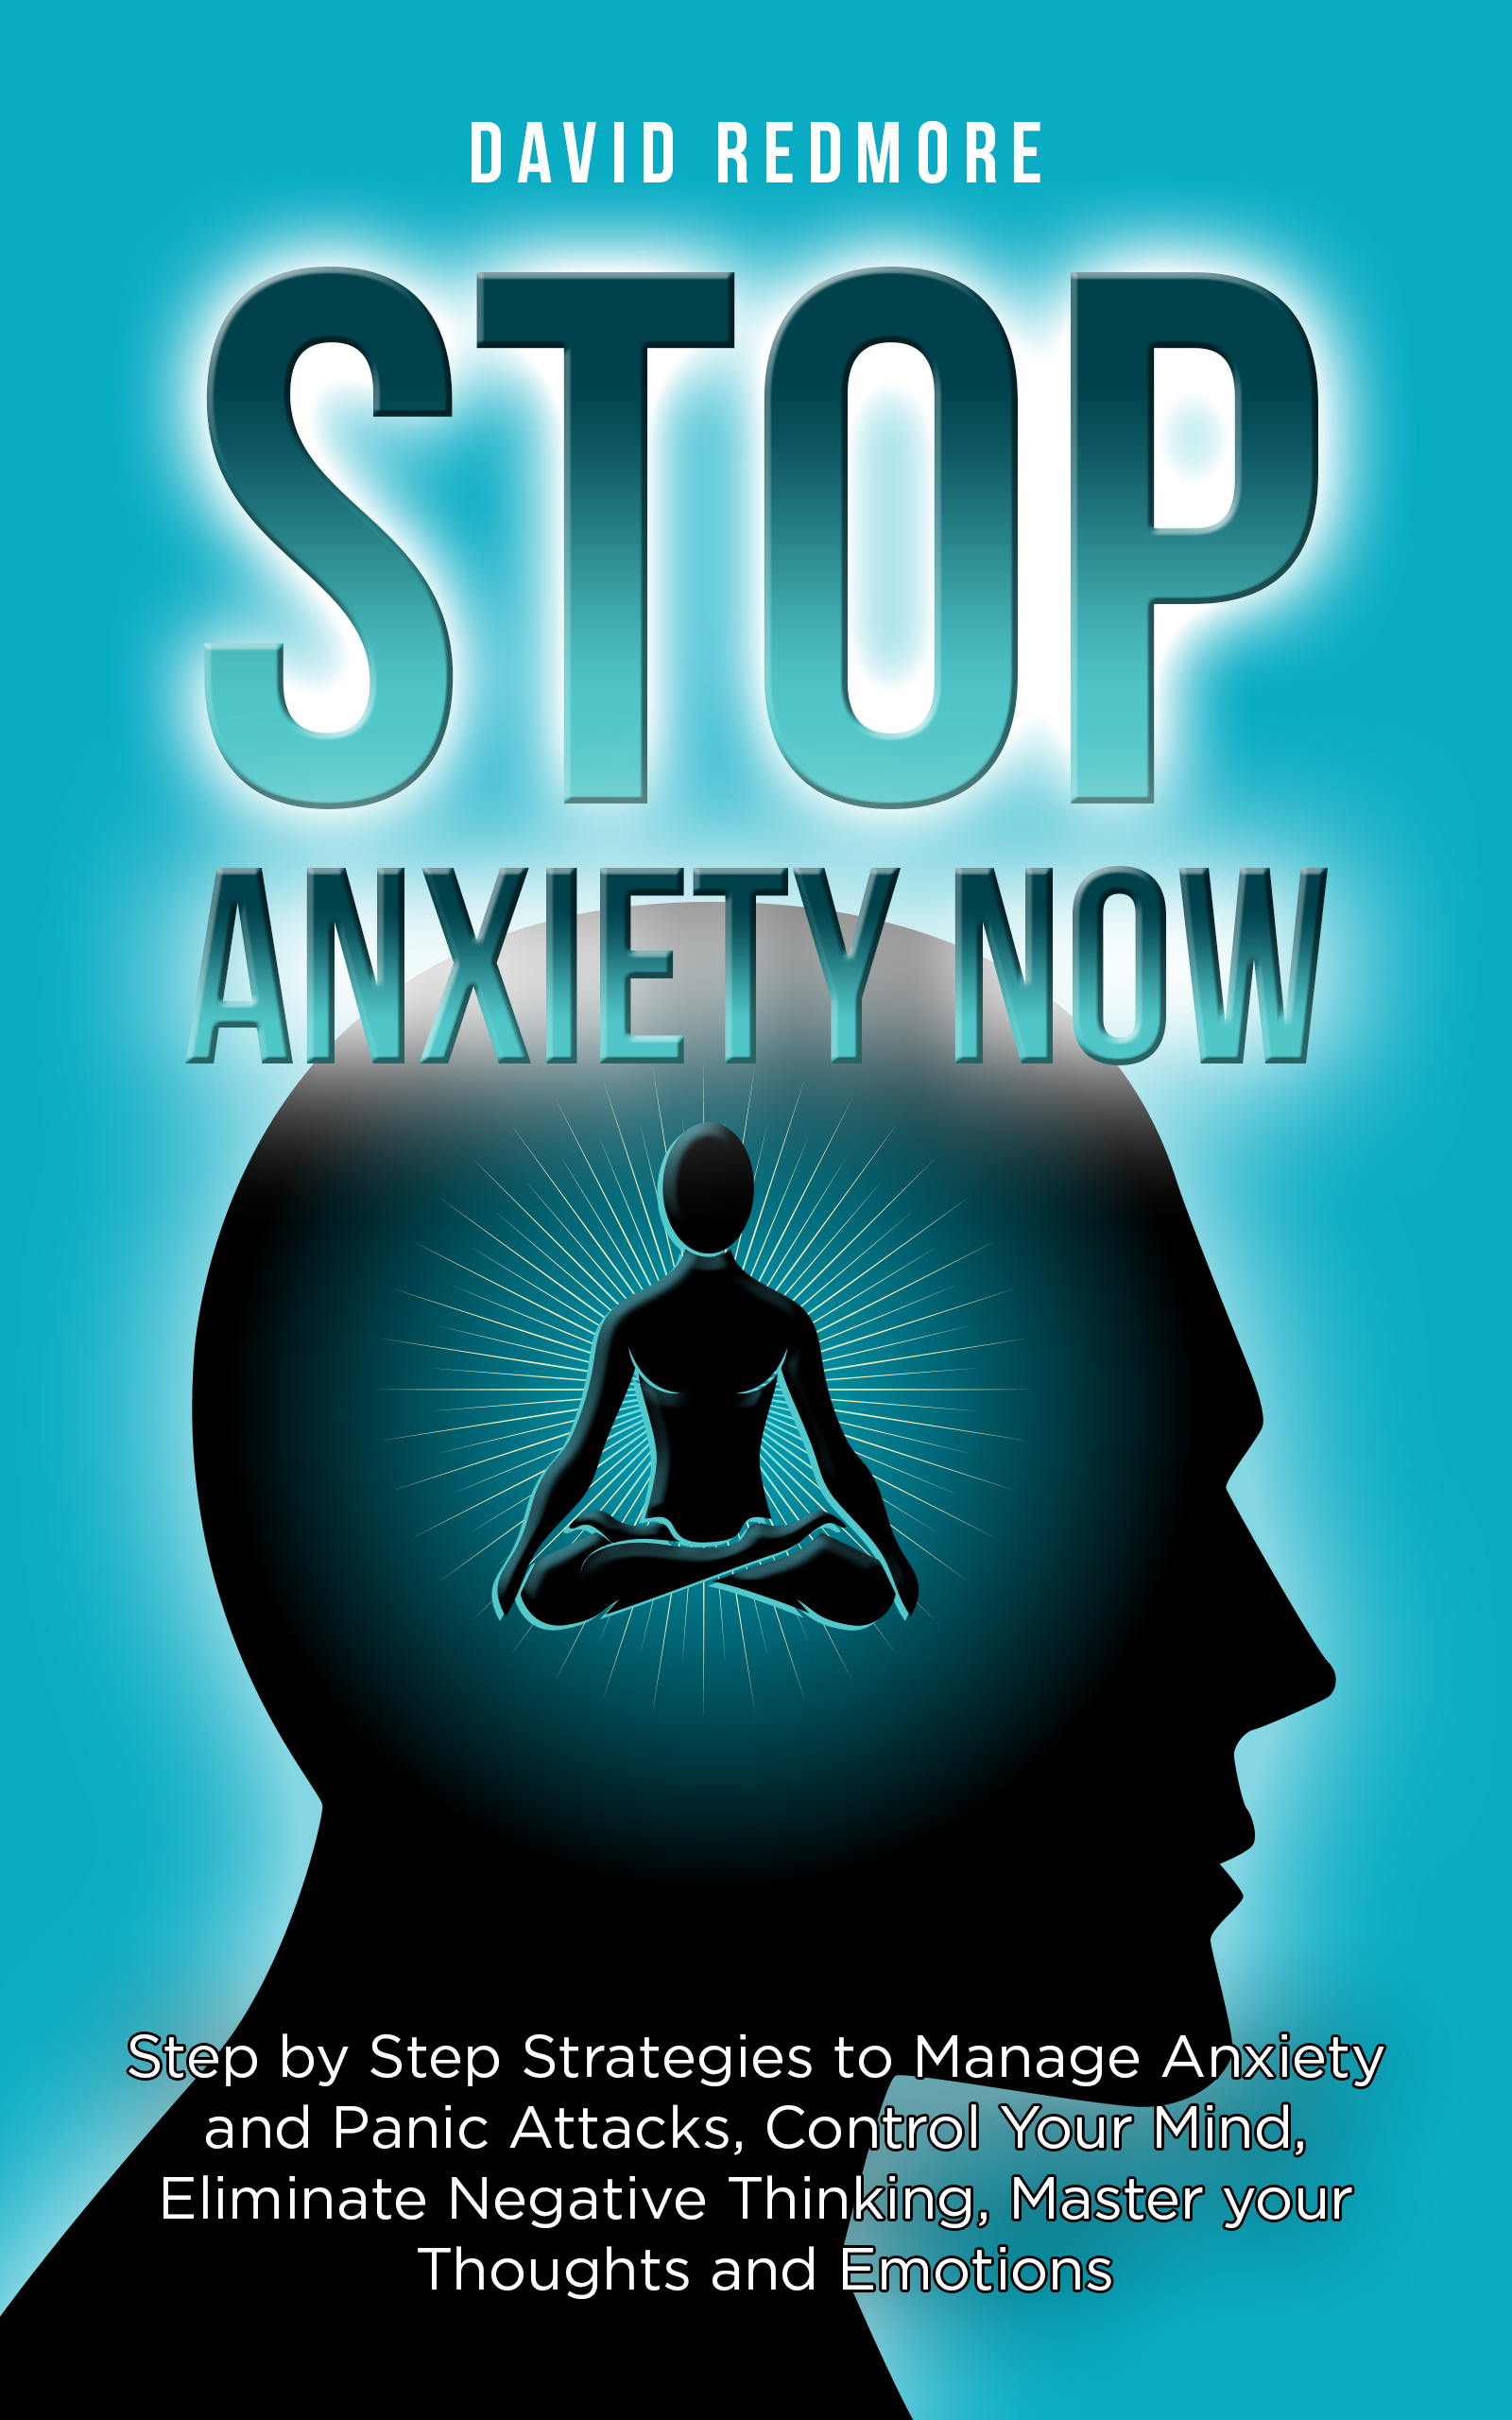 FREE: Stop Anxiety Now: Step by Step Strategies to Manage Anxiety and Panic Attacks, Control Your Mind, Eliminate Negative Thinking, Master your Thoughts and Emotions. by David Redmore